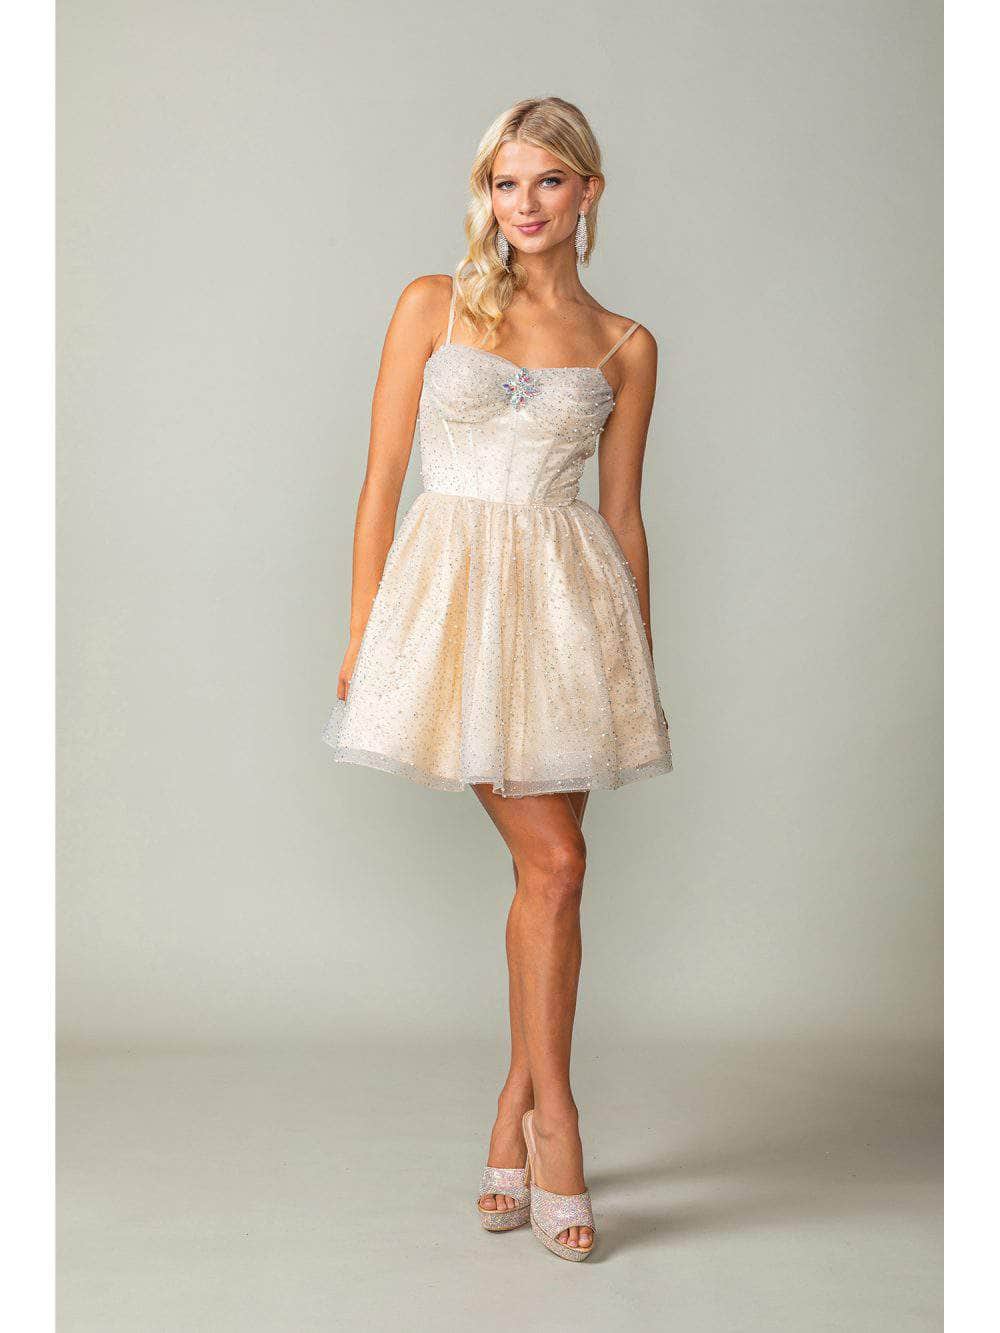 Dancing Queen 3389 - Bejeweled Tulle Cocktail Dress Special Occasion Dresses